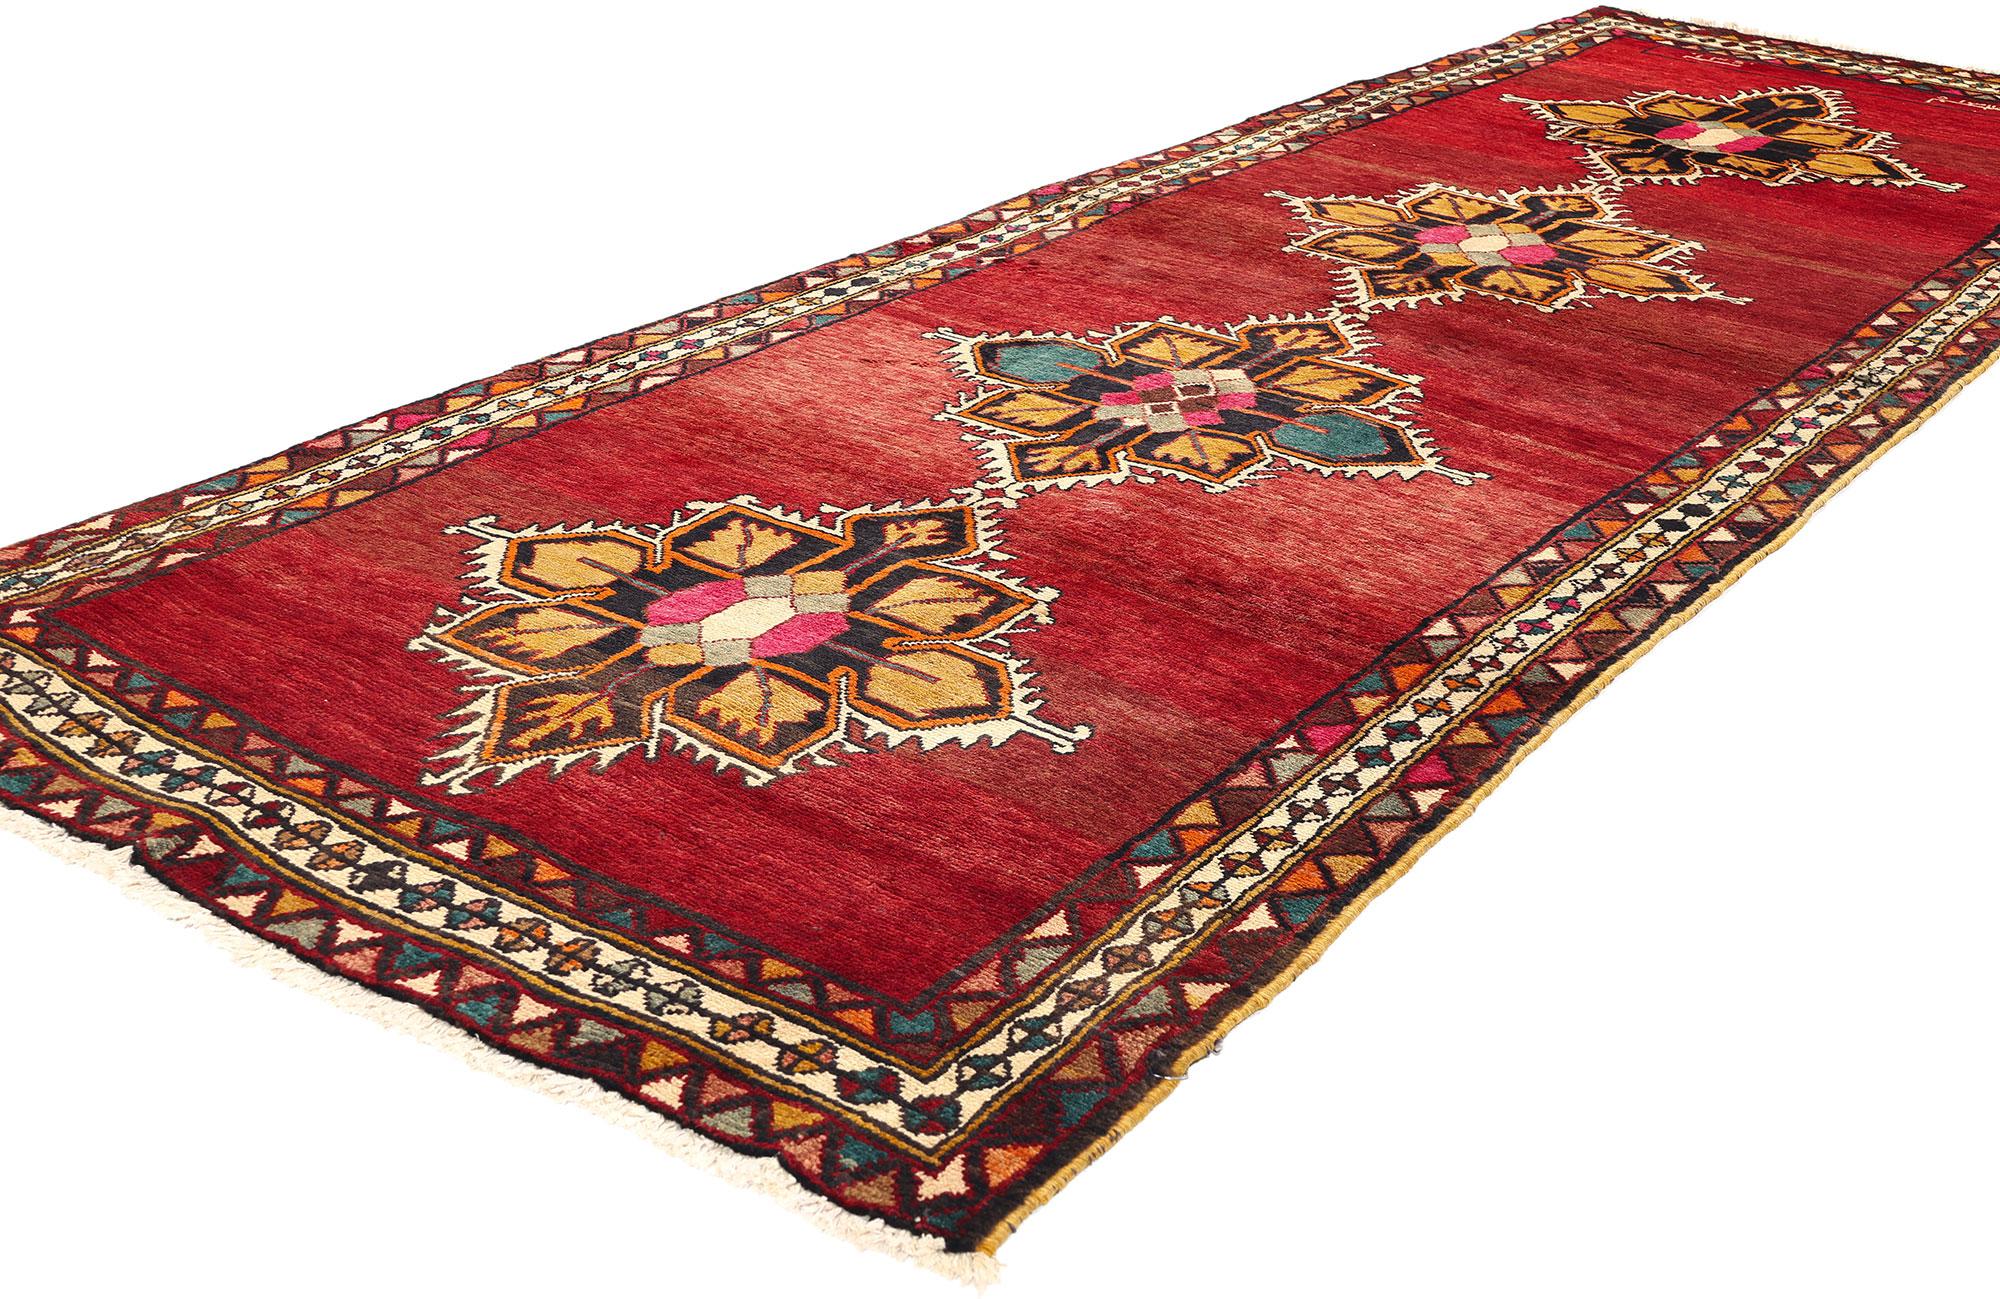 76481 Vintage Persian Khorassan Rug Runner, 03'09 x 11'07. Persian Khorassan carpet runners, originating from the Khorasan region of Iran, represent a pinnacle of traditional handwoven craftsmanship, renowned globally for their exceptional quality